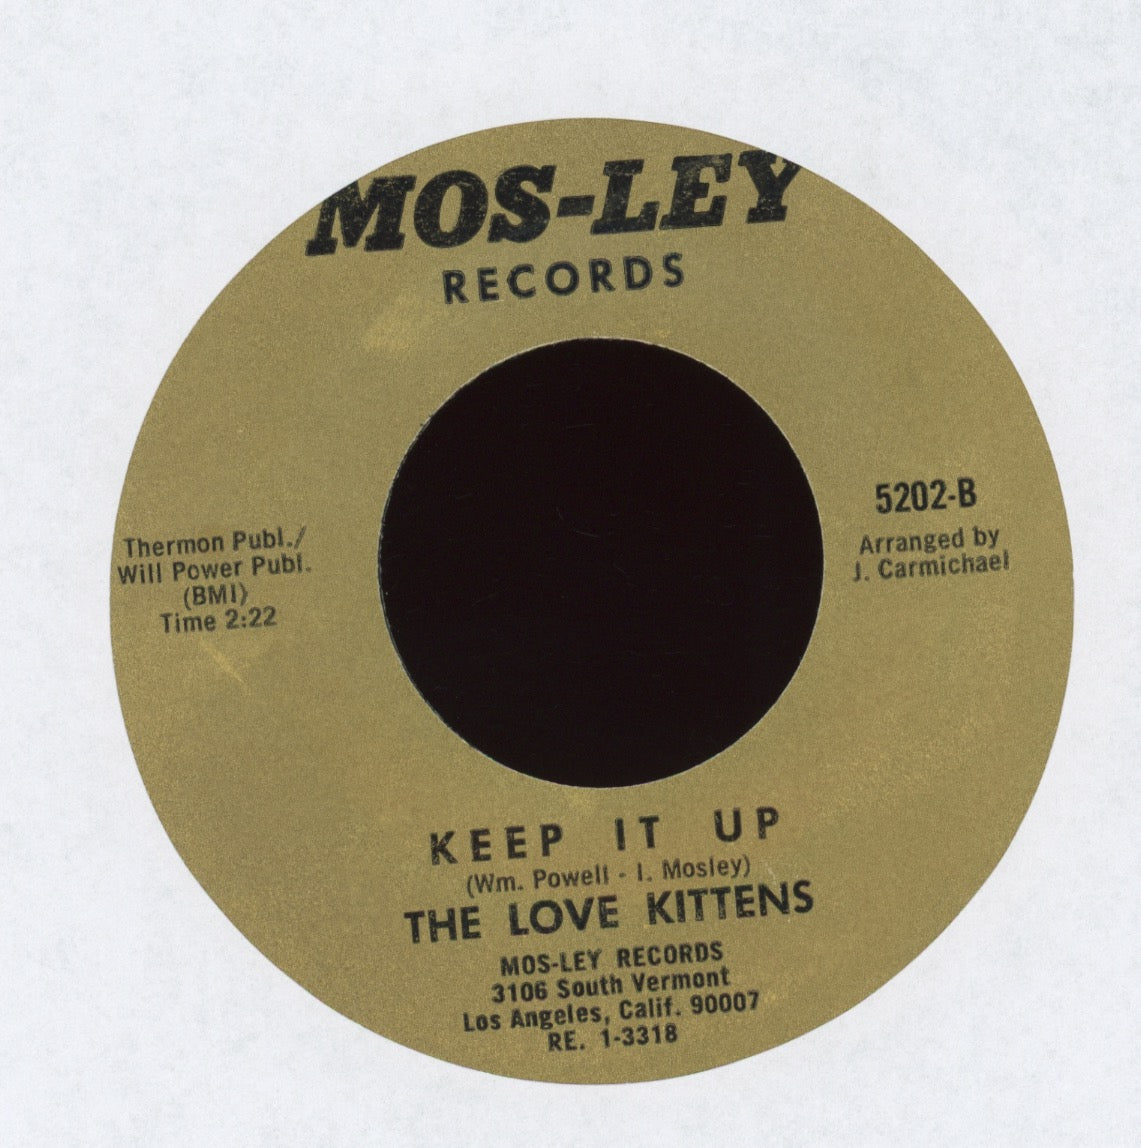 The Love Kittens - I Like Everything About You on Mos-Ley